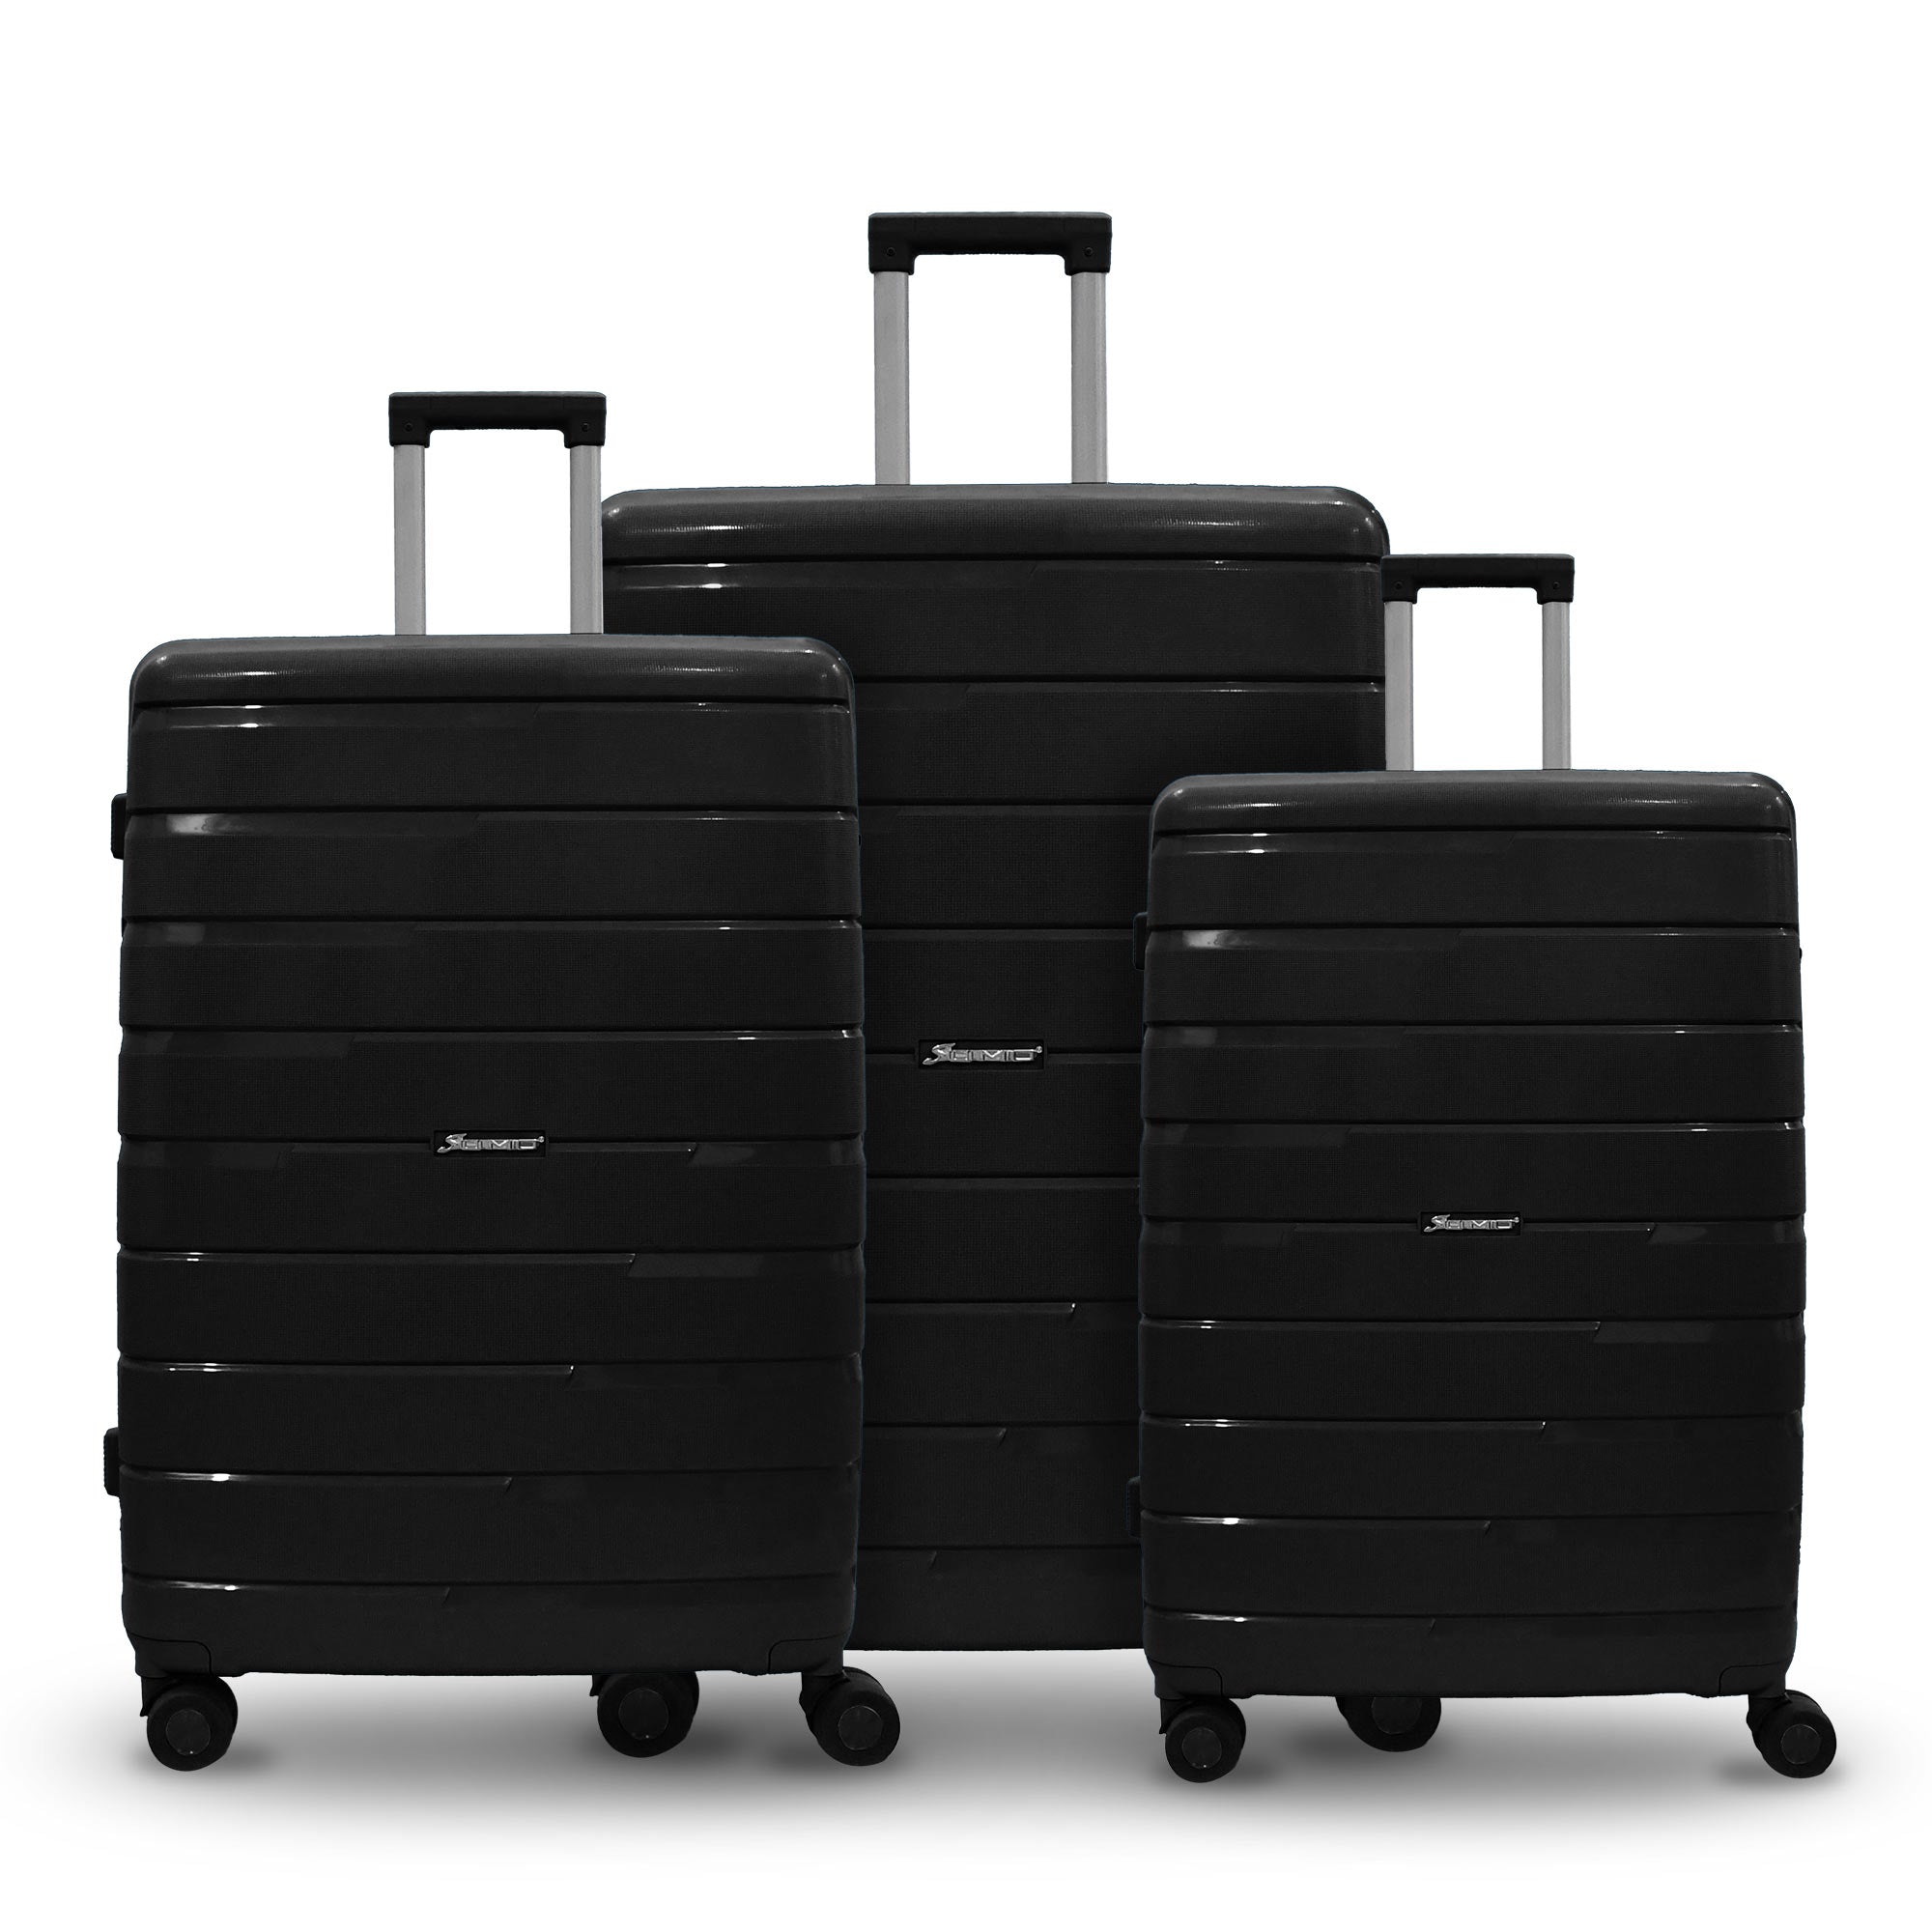 SUMO AIRLITE 360° EXPANDABLE PP LUGGAGE 3PC SET 21/25/29"